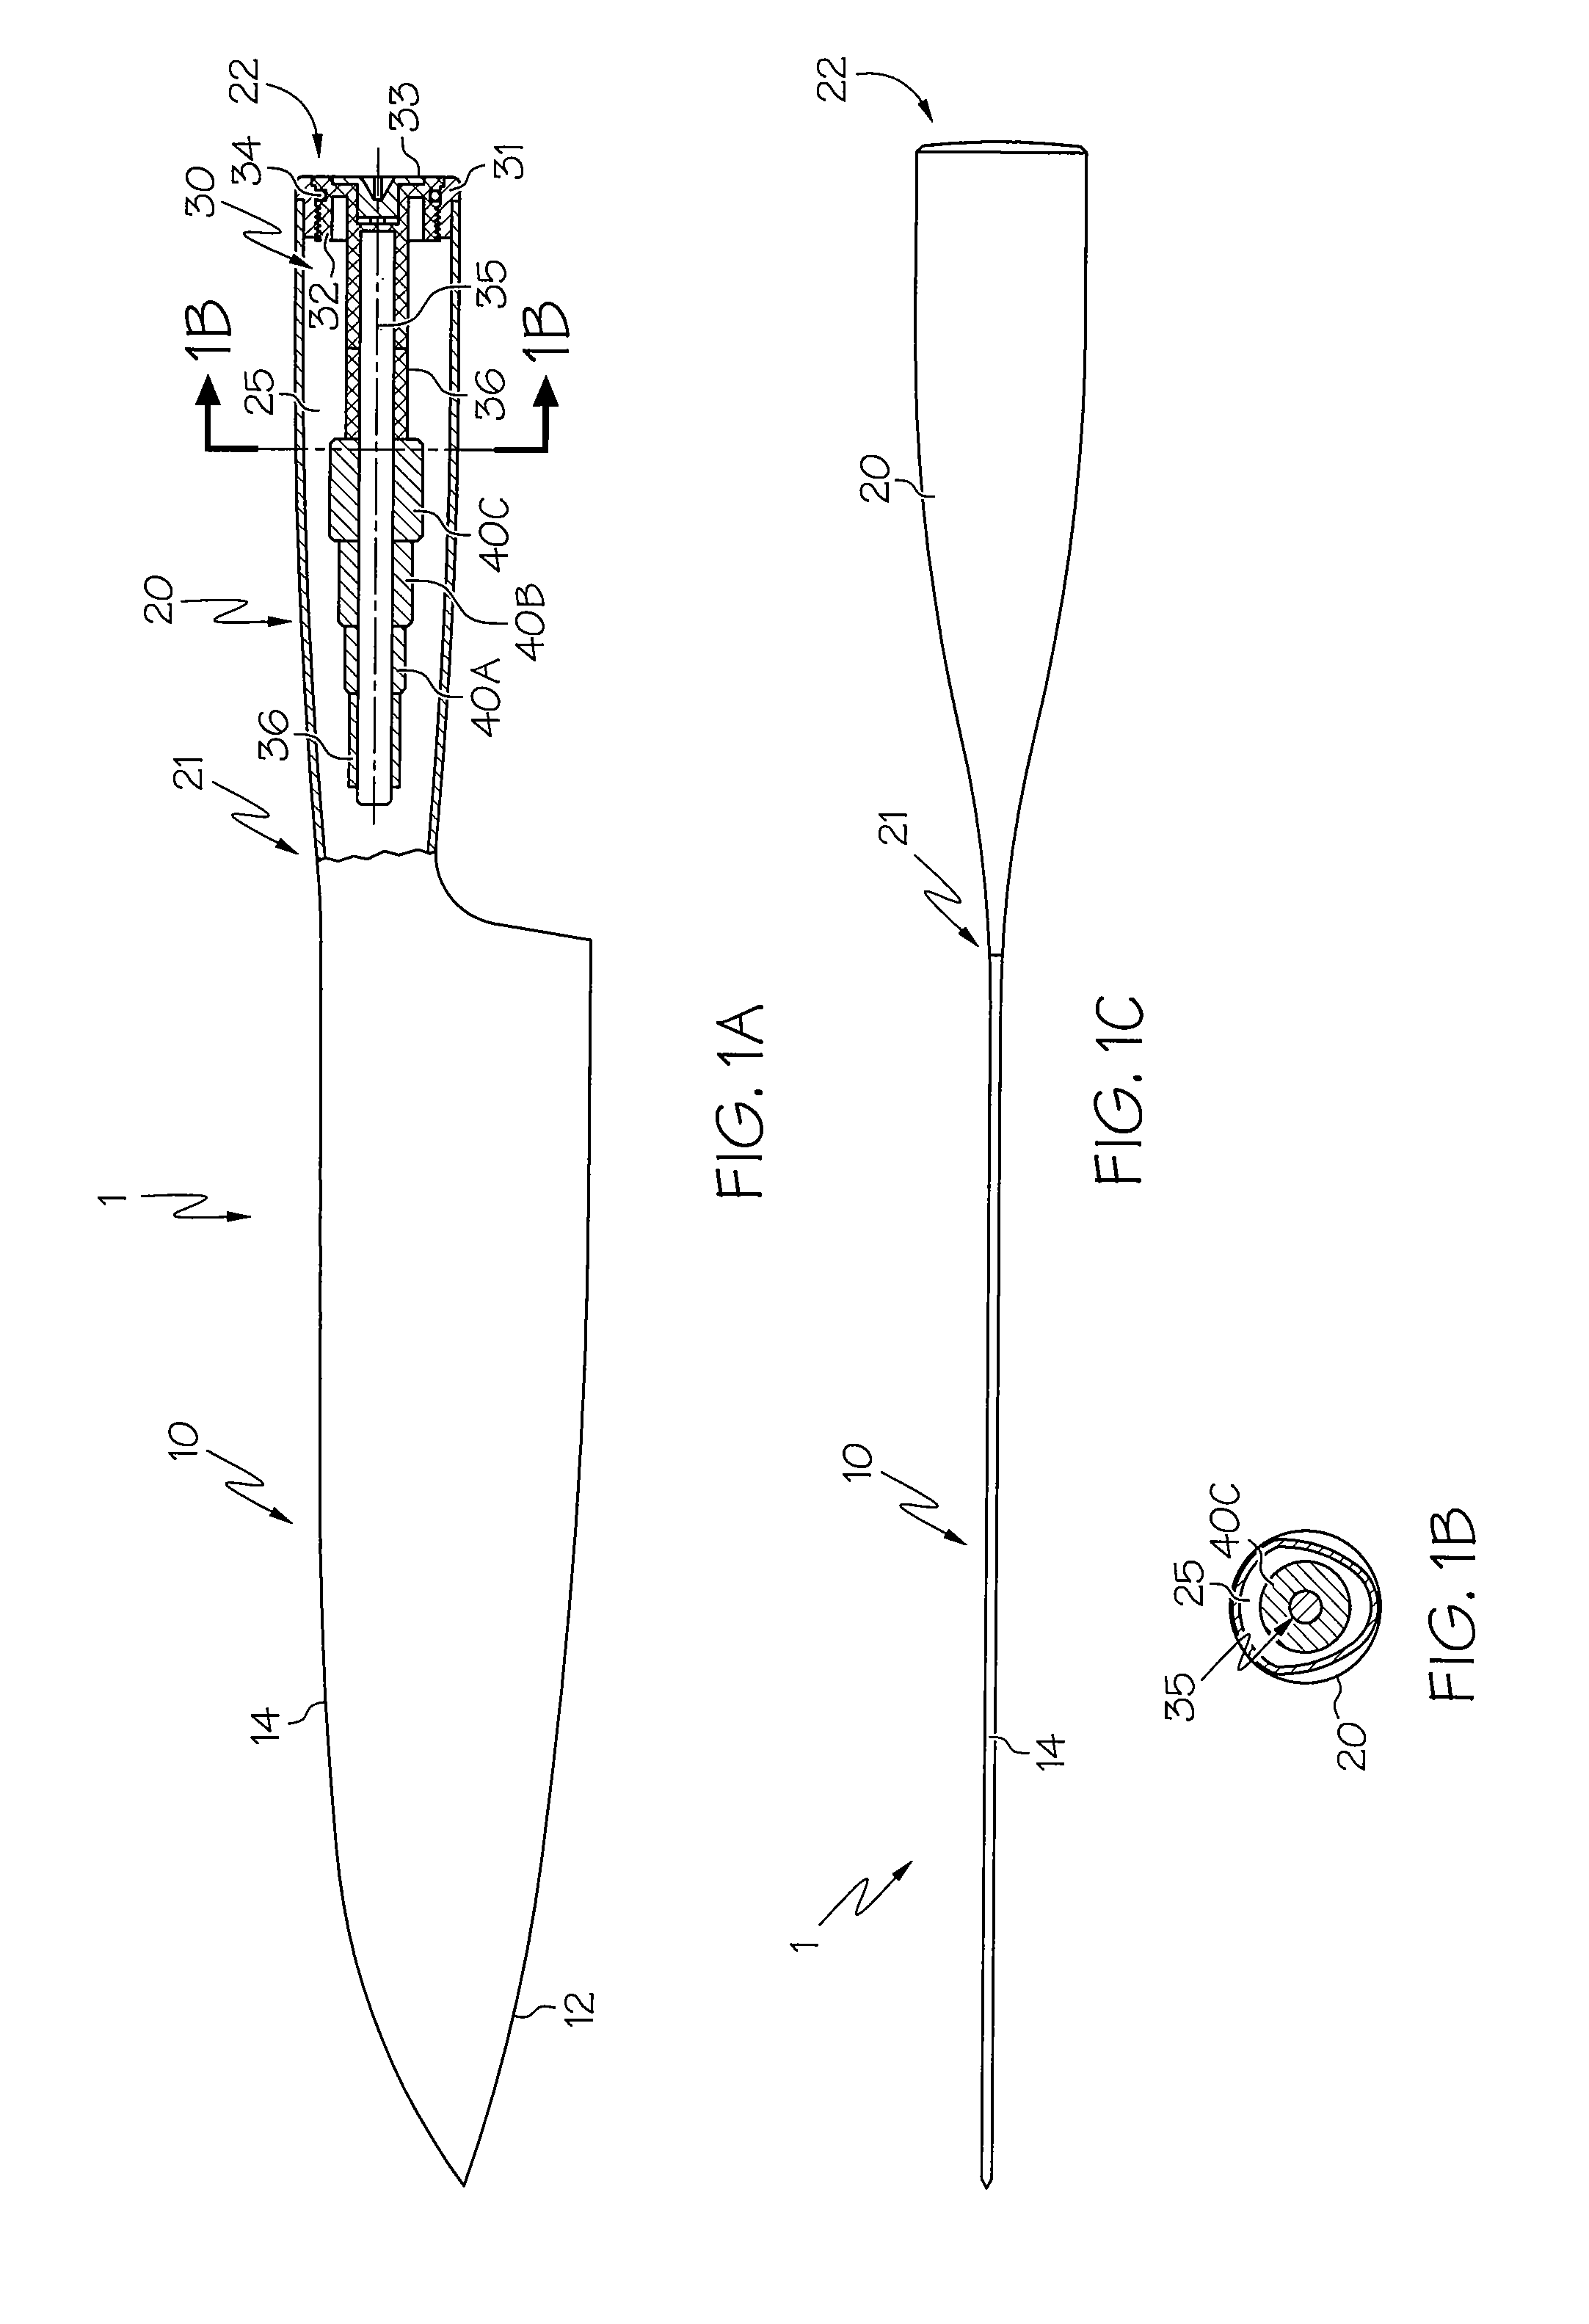 Method of balancing a kitchen knife using removable handle weights